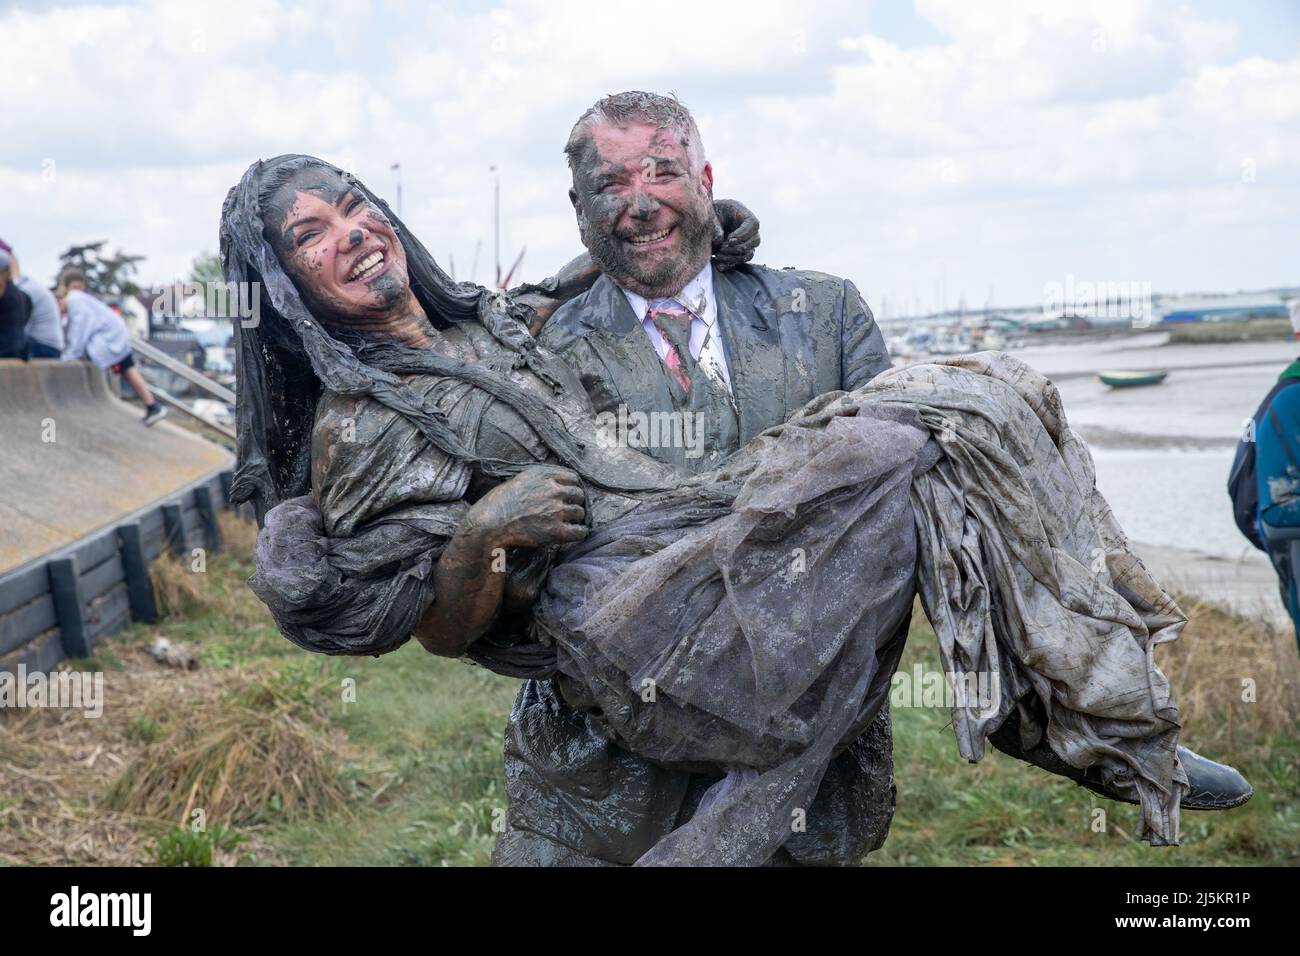 Maldon, Essex, UK. 24th April 2022. Newlywed competitors take part in the Maldon Mud Race in Maldon, Essex on April 24th 2022 as the race returns for the first time in two years. Credit: Lucy North/Alamy Live News Stock Photo